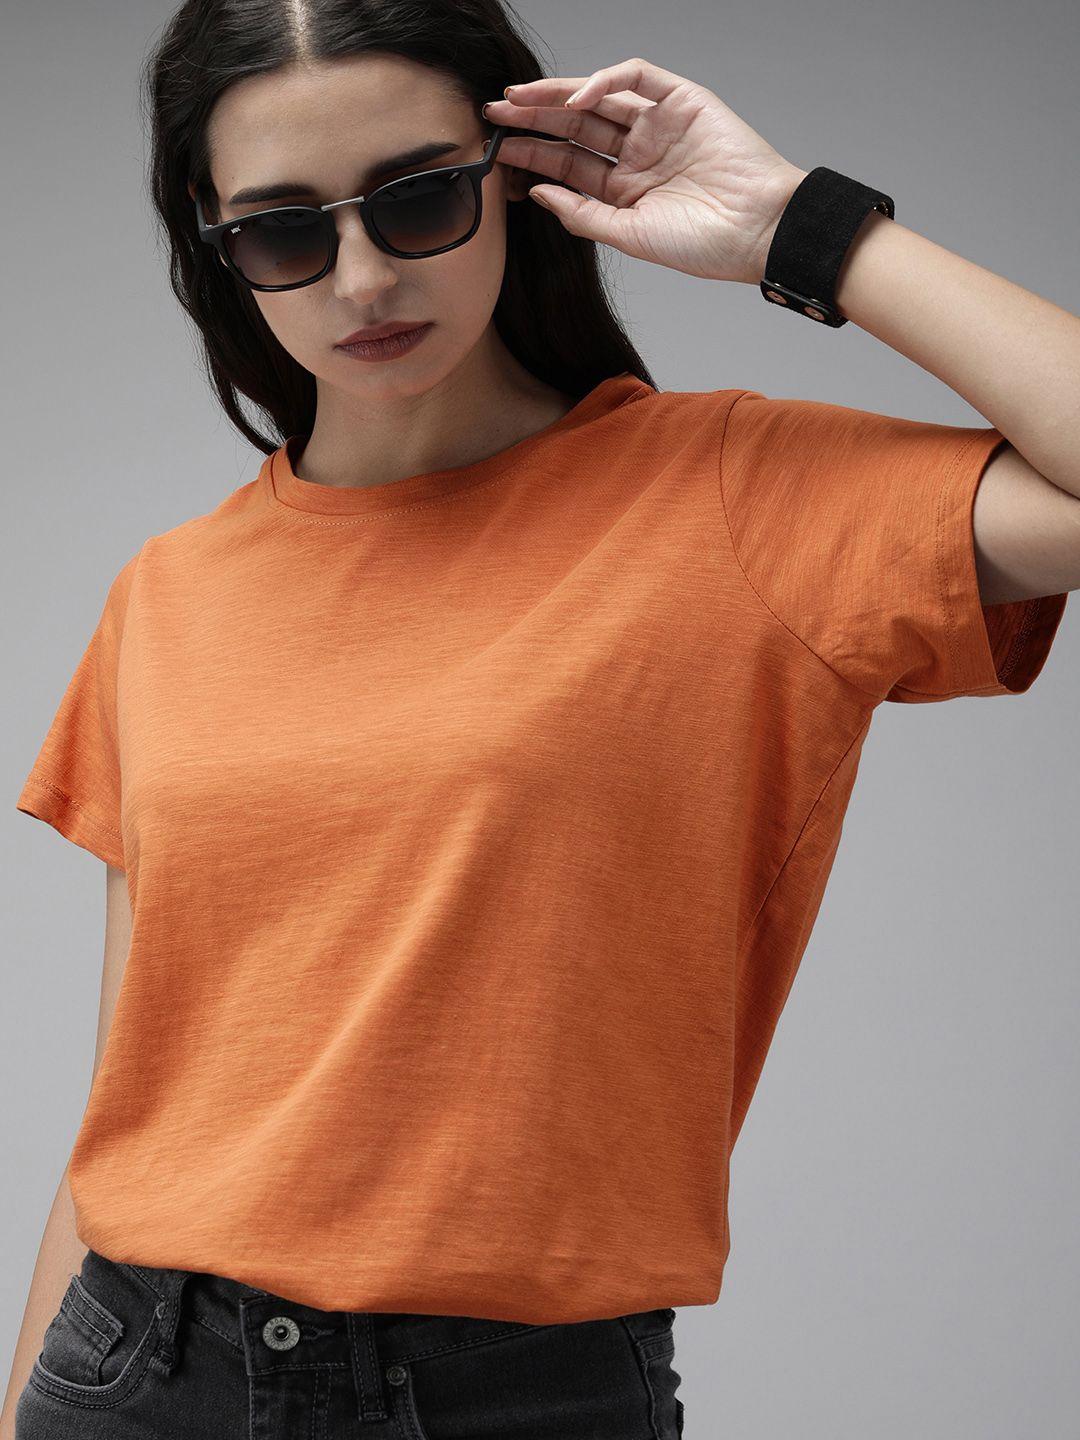 the roadster lifestyle co women rust orange solid round neck pure cotton t-shirt